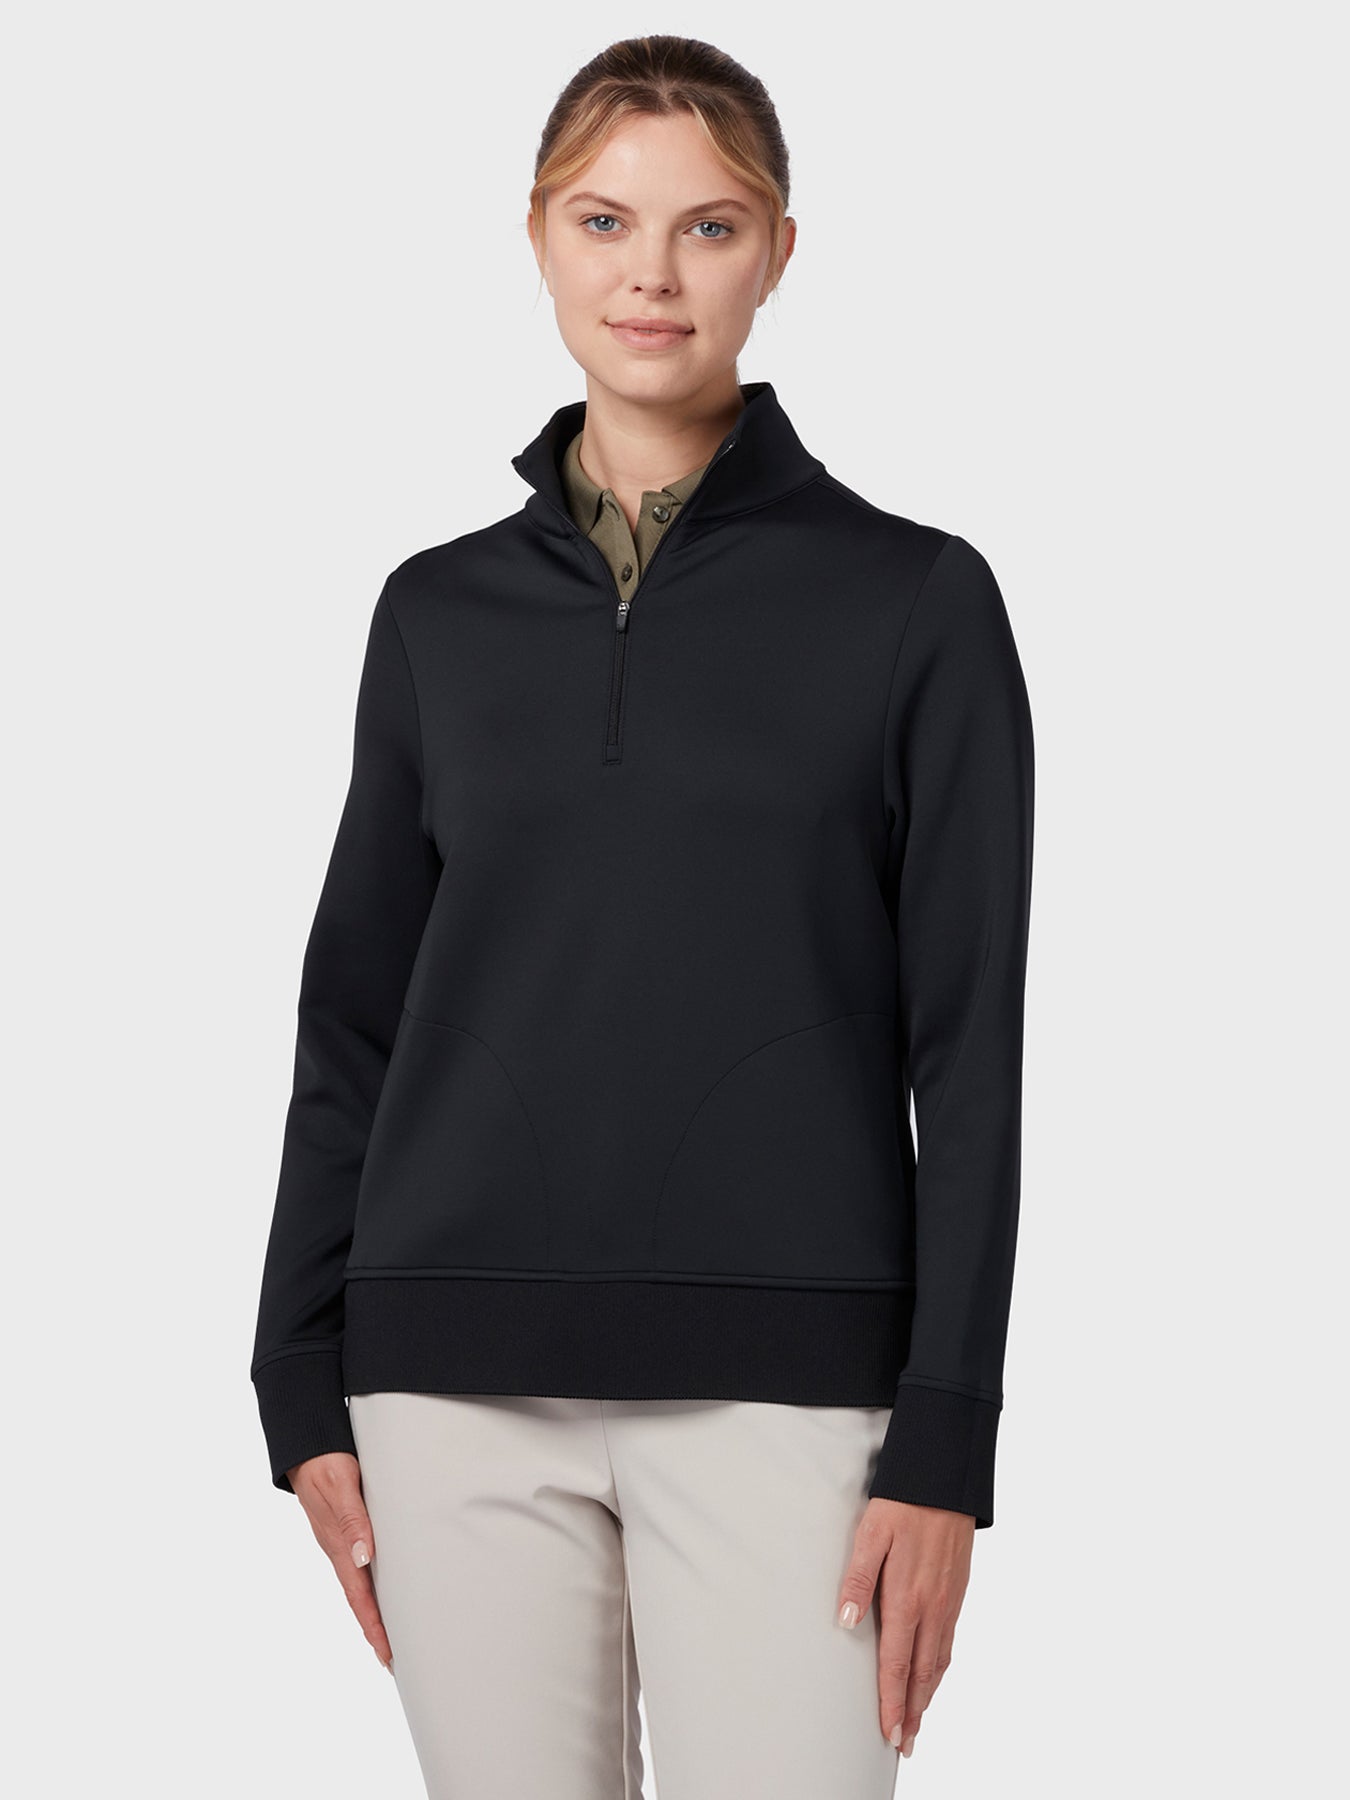 View Midweight Womens Fleece Crossover In Caviar Caviar L information